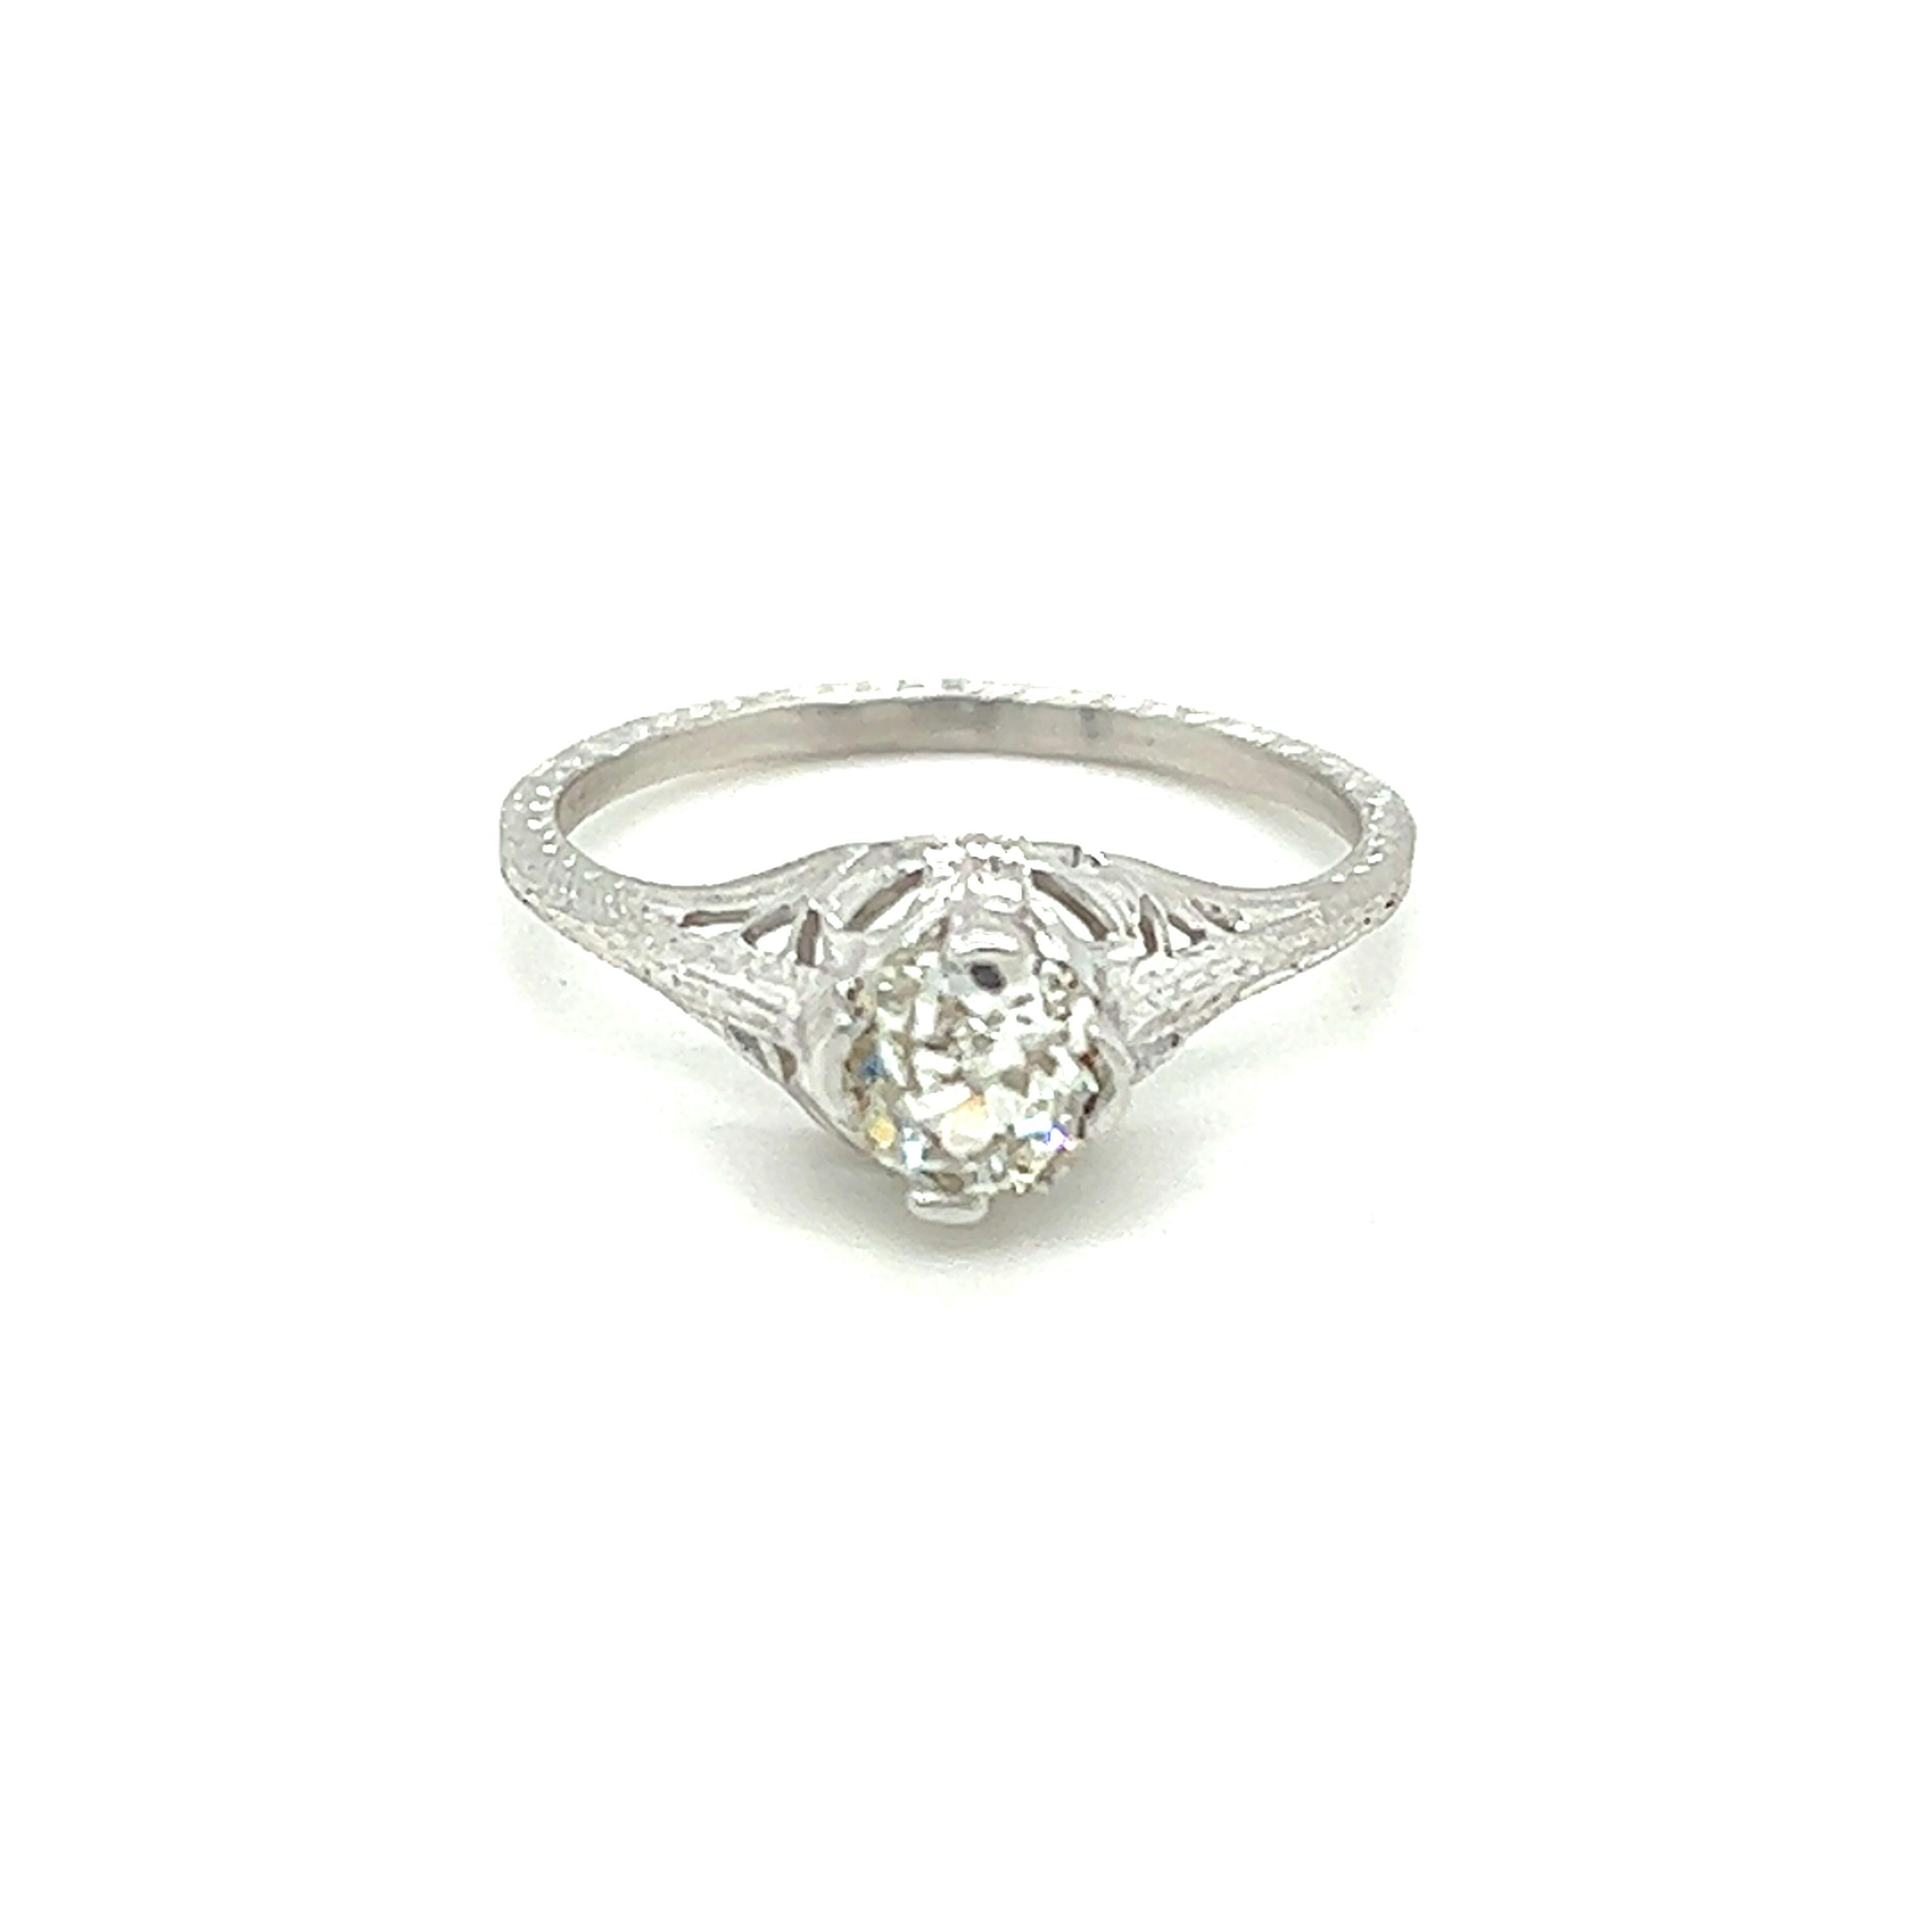 One 18 karat white gold Art Deco filigree diamond engagement ring set with one antique cushion cut diamond, approximately 0.57 carat  with K color and I1 clarity. The ring is a finger size 6.75 and can be resized. Sizing is not included.  The ring